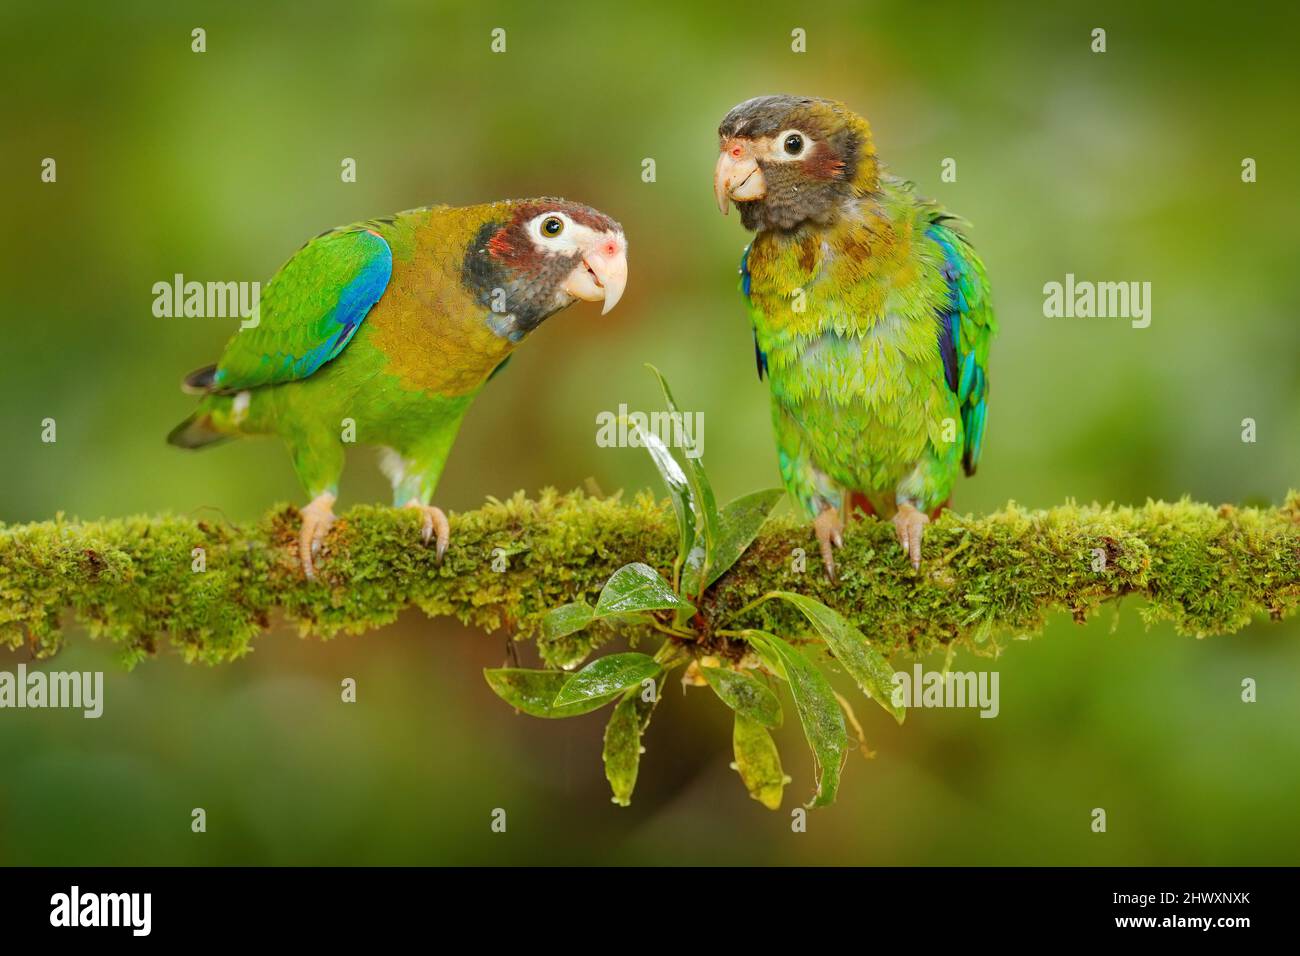 Costa Rica wildlife, two parrots. Brown-hooded Parrot, Pionopsitta haematotis, portrait of light green parrot with brown head. Stock Photo